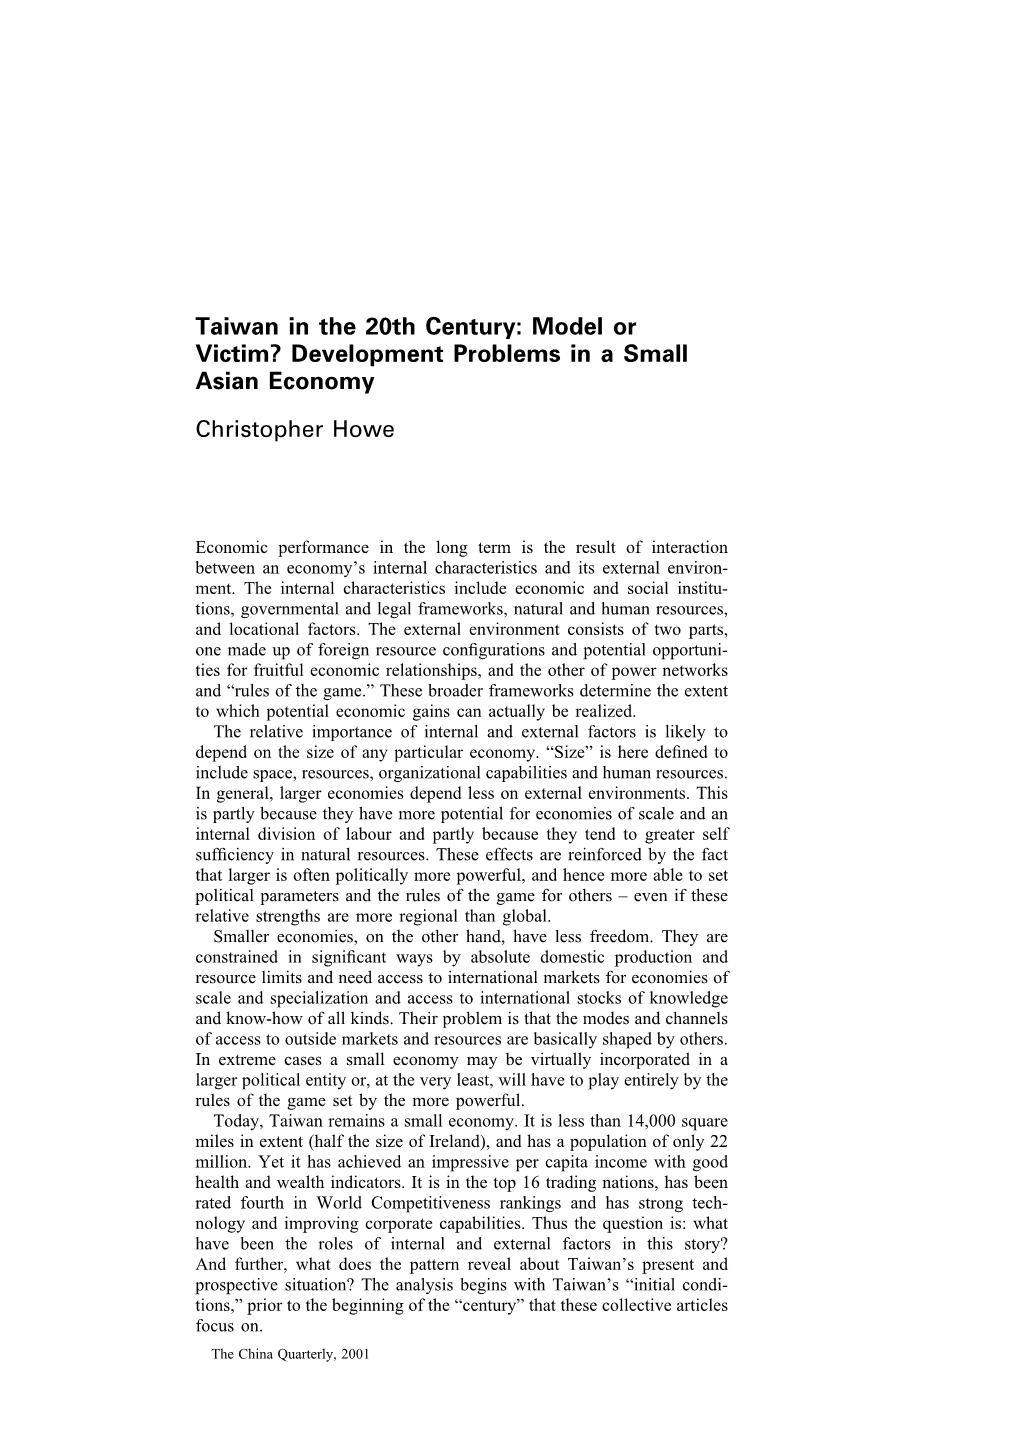 Taiwan in the 20Th Century: Model Or Victim? Development Problems in a Small Asian Economy